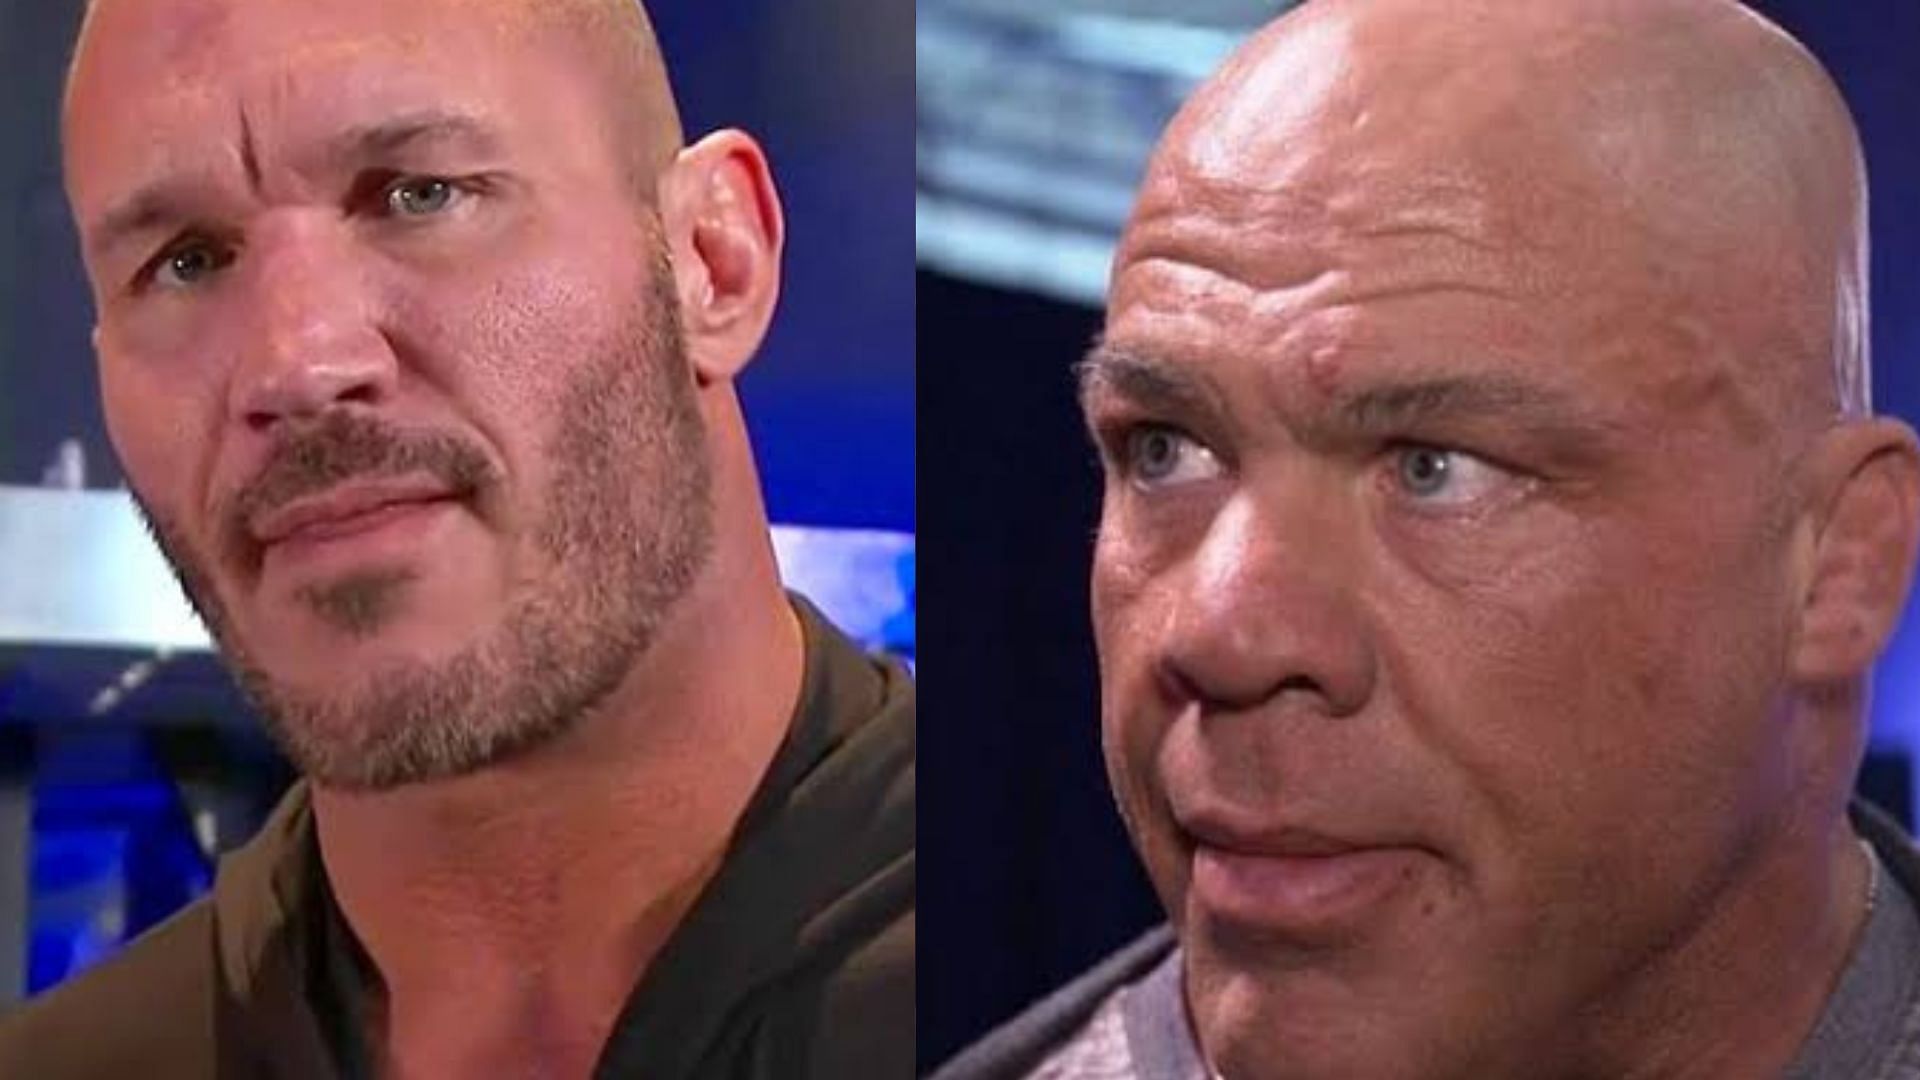 Orton and Angle have encyclopedic knowledge about the business.